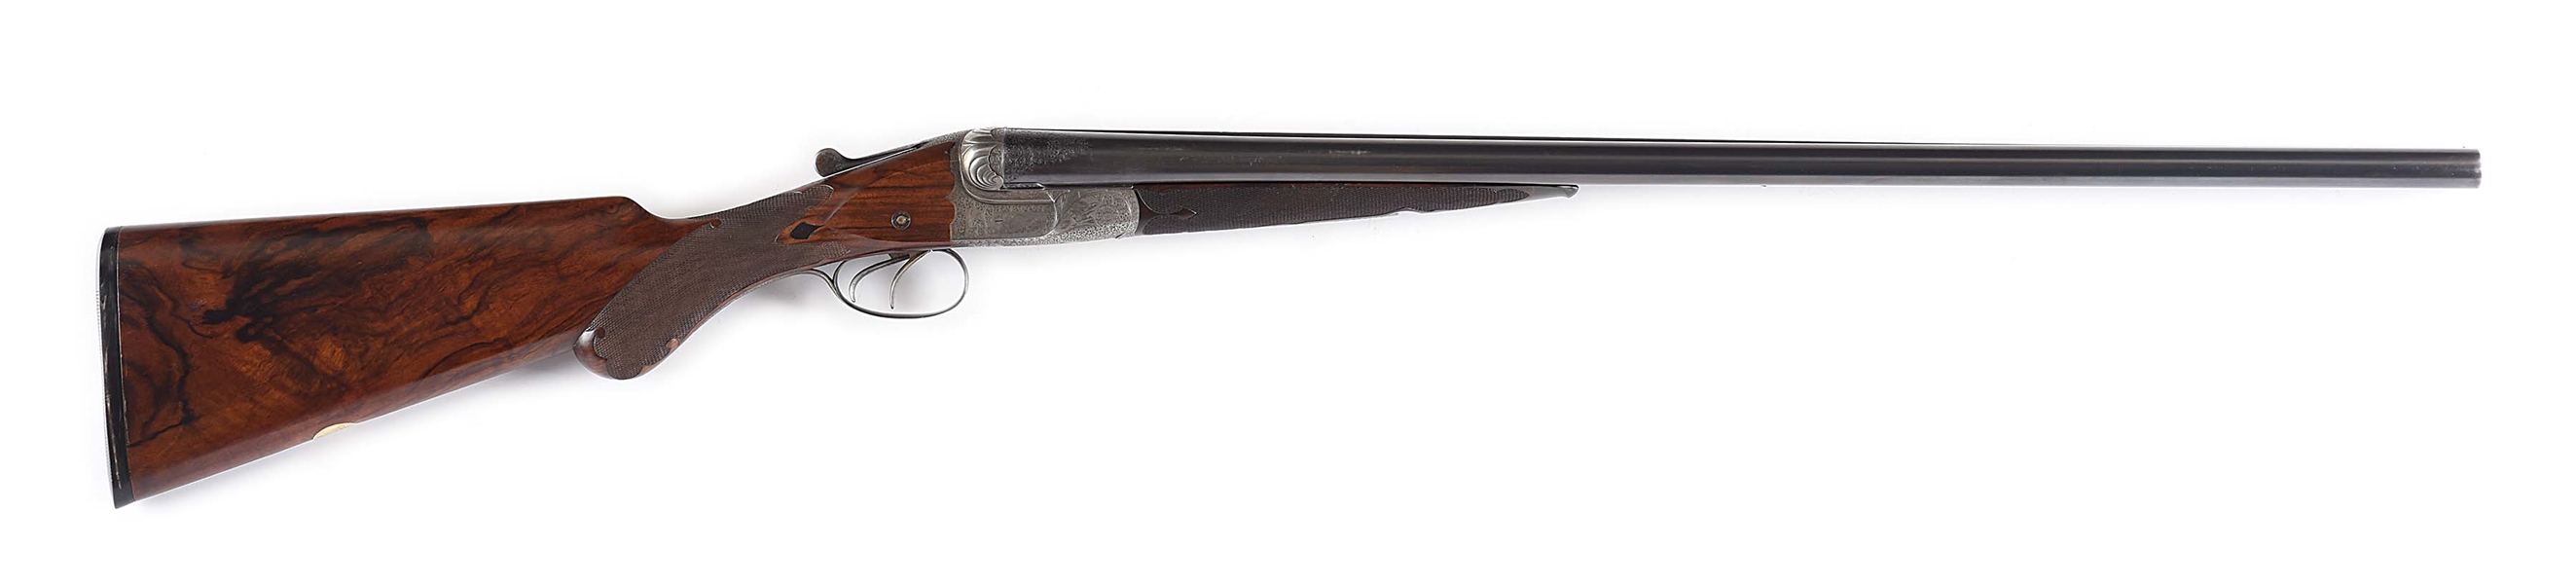 (C) CLASSIC "G 70 EJECTOR" W.W. GREENER IMPERIAL GRADE HEAVY PROOF GAME SHOTGUN EXQUISITELY ENGRAVED BY TOMLINSON WITH CASE AND ACCESSORIES. 